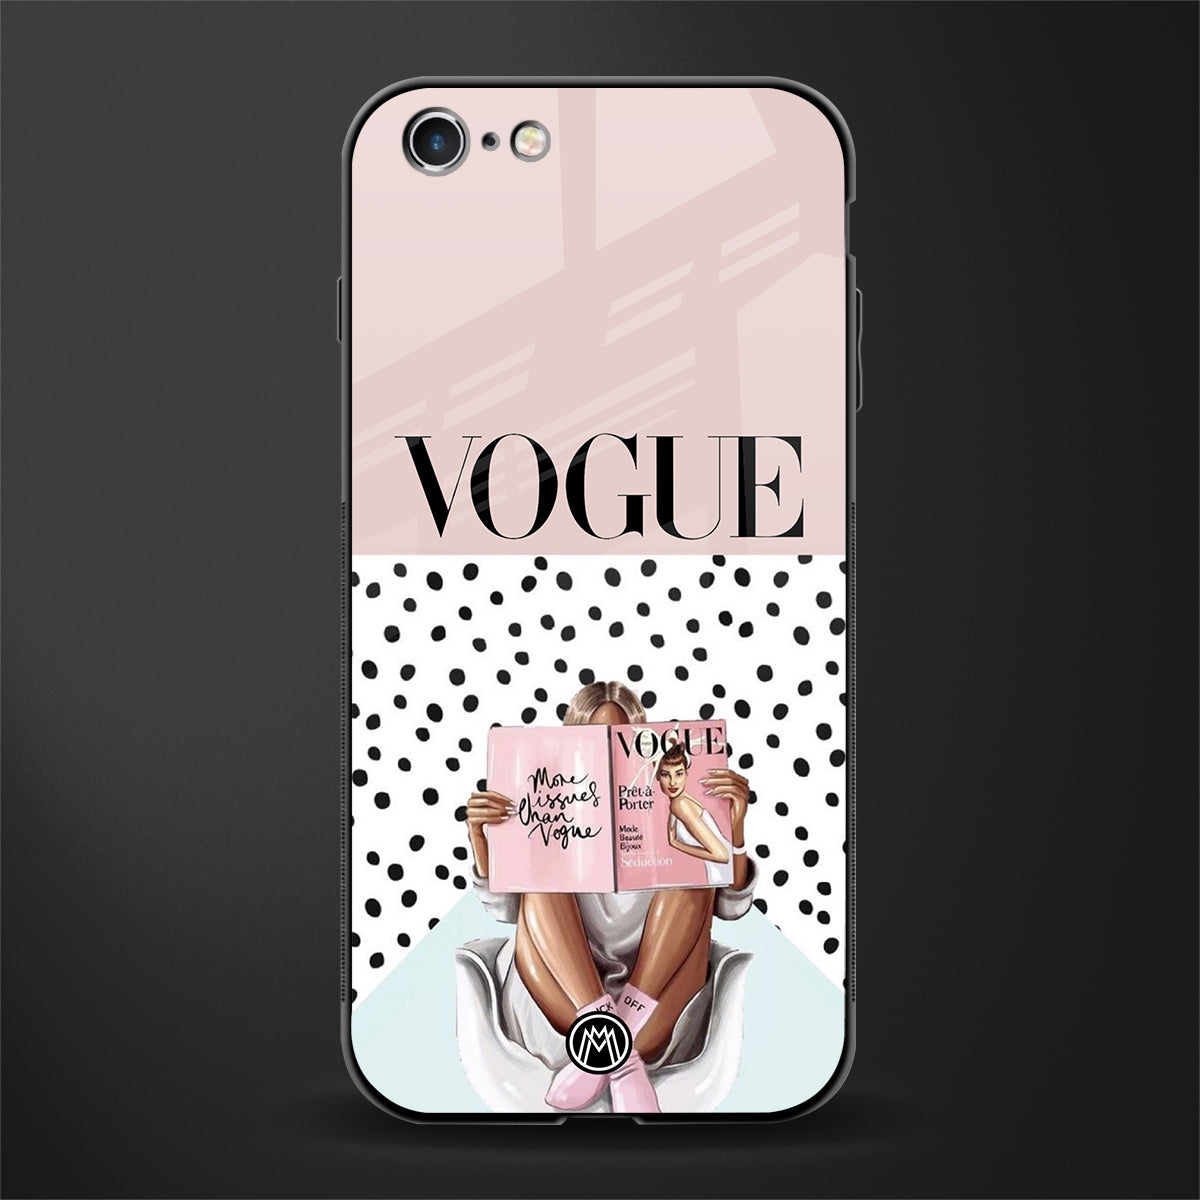 vogue queen glass case for iphone 6 image